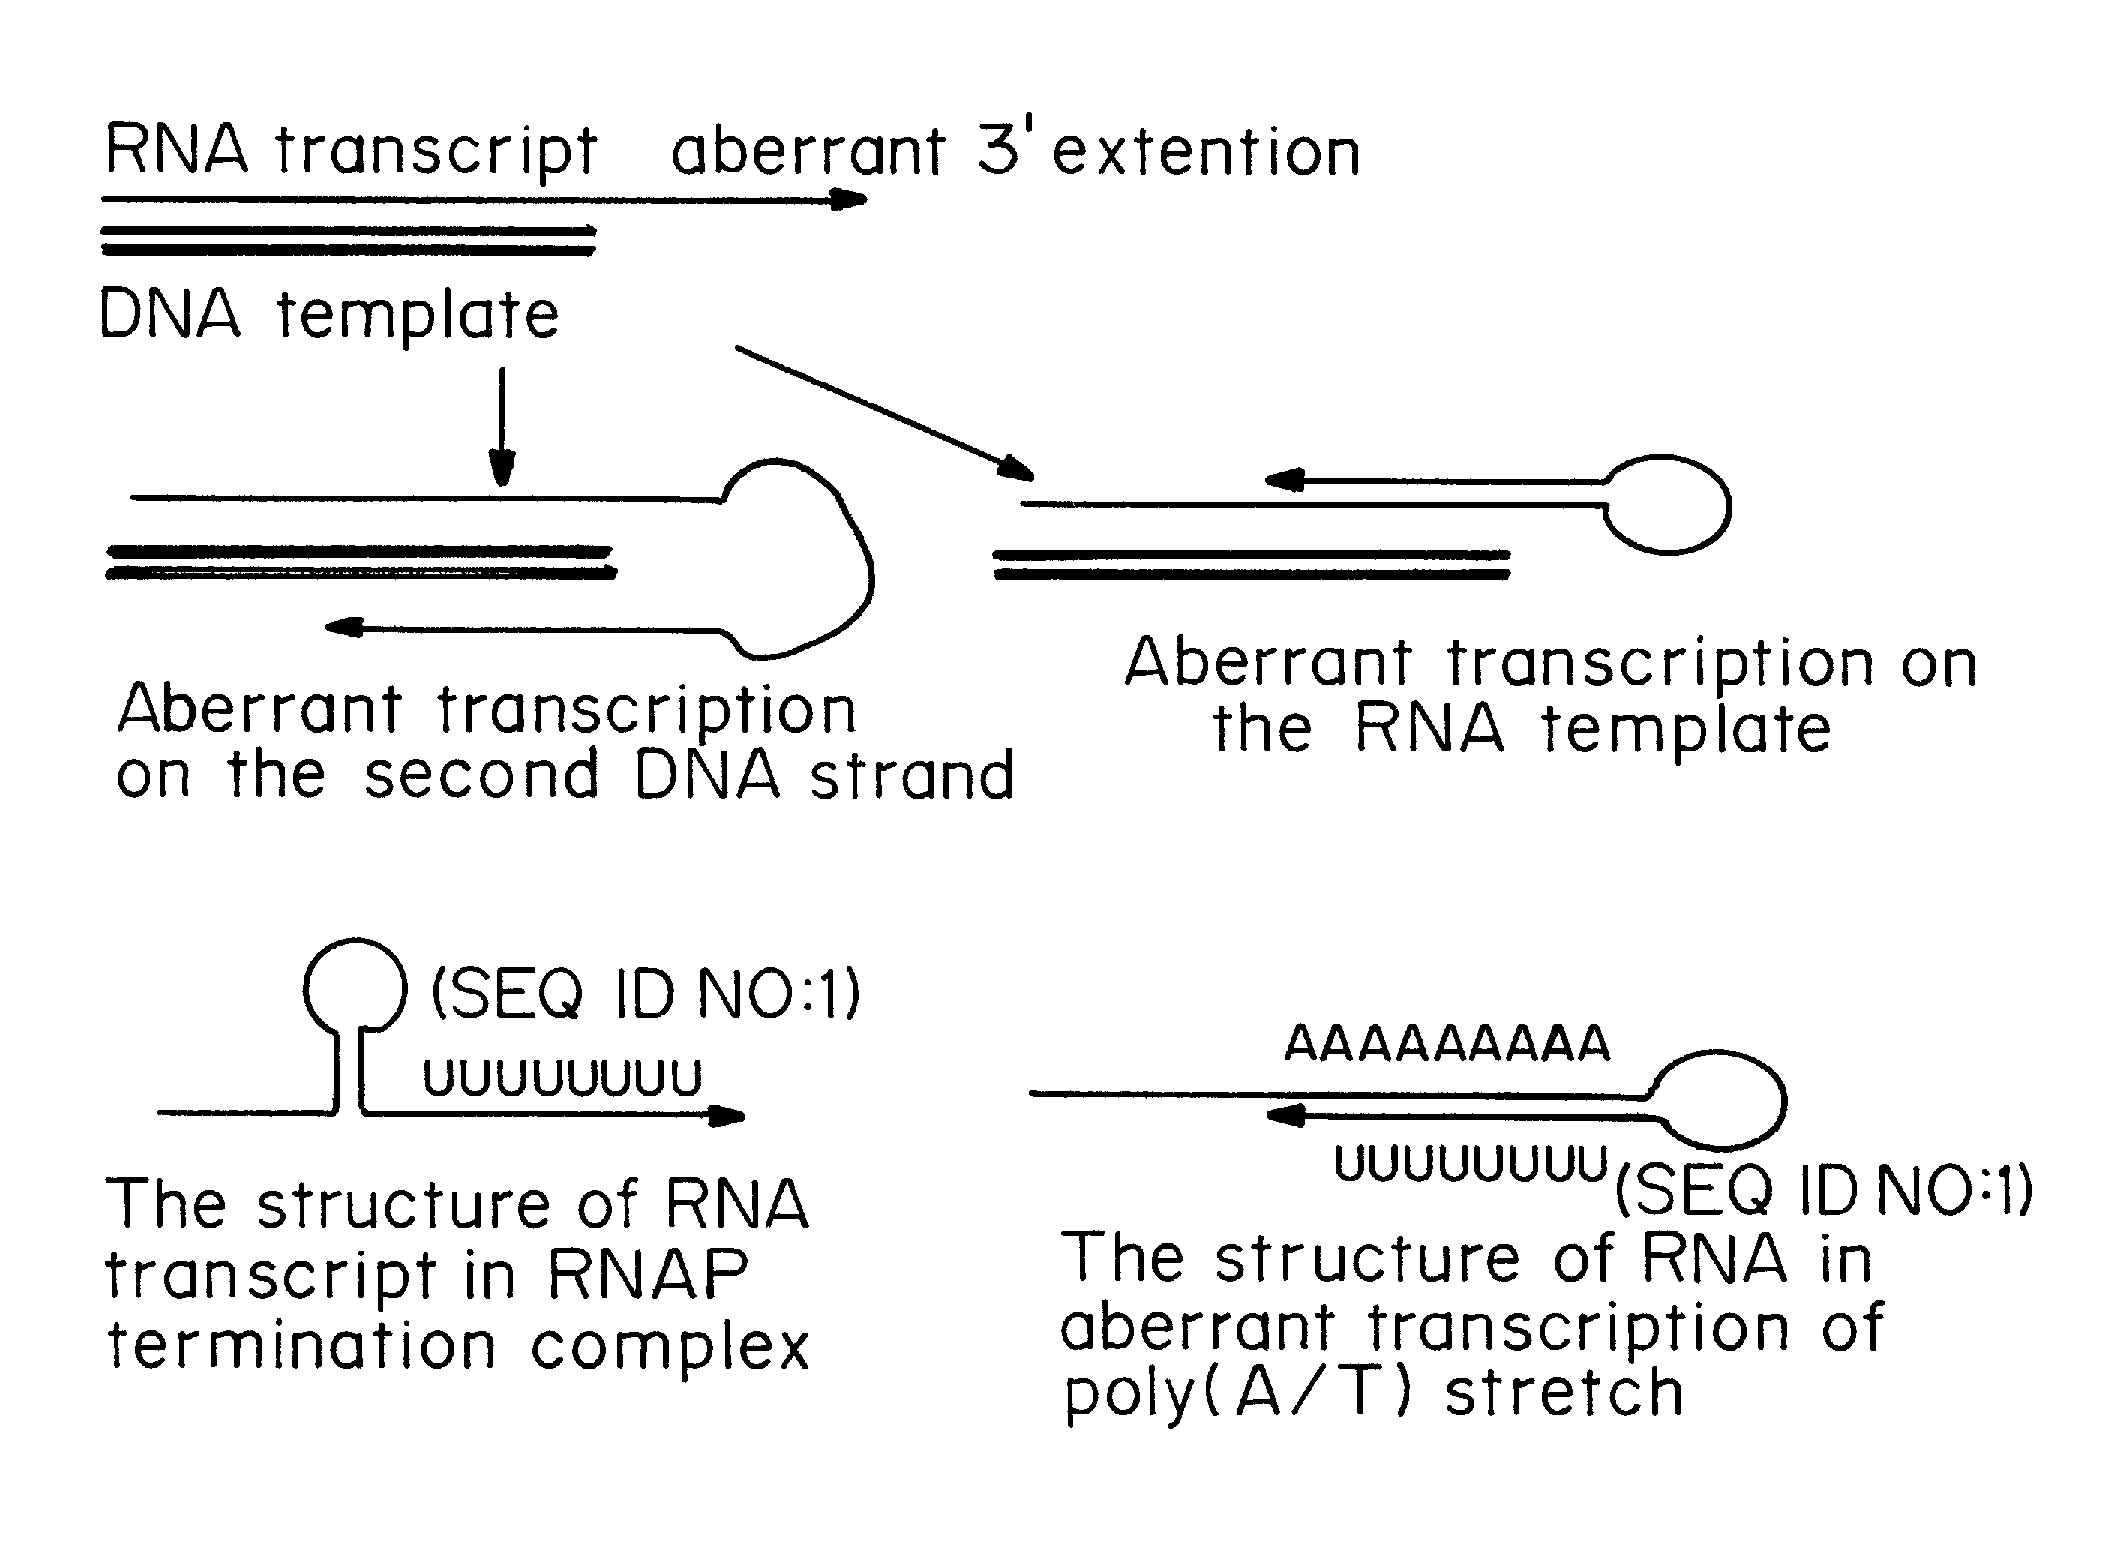 Transient Transfection with RNA